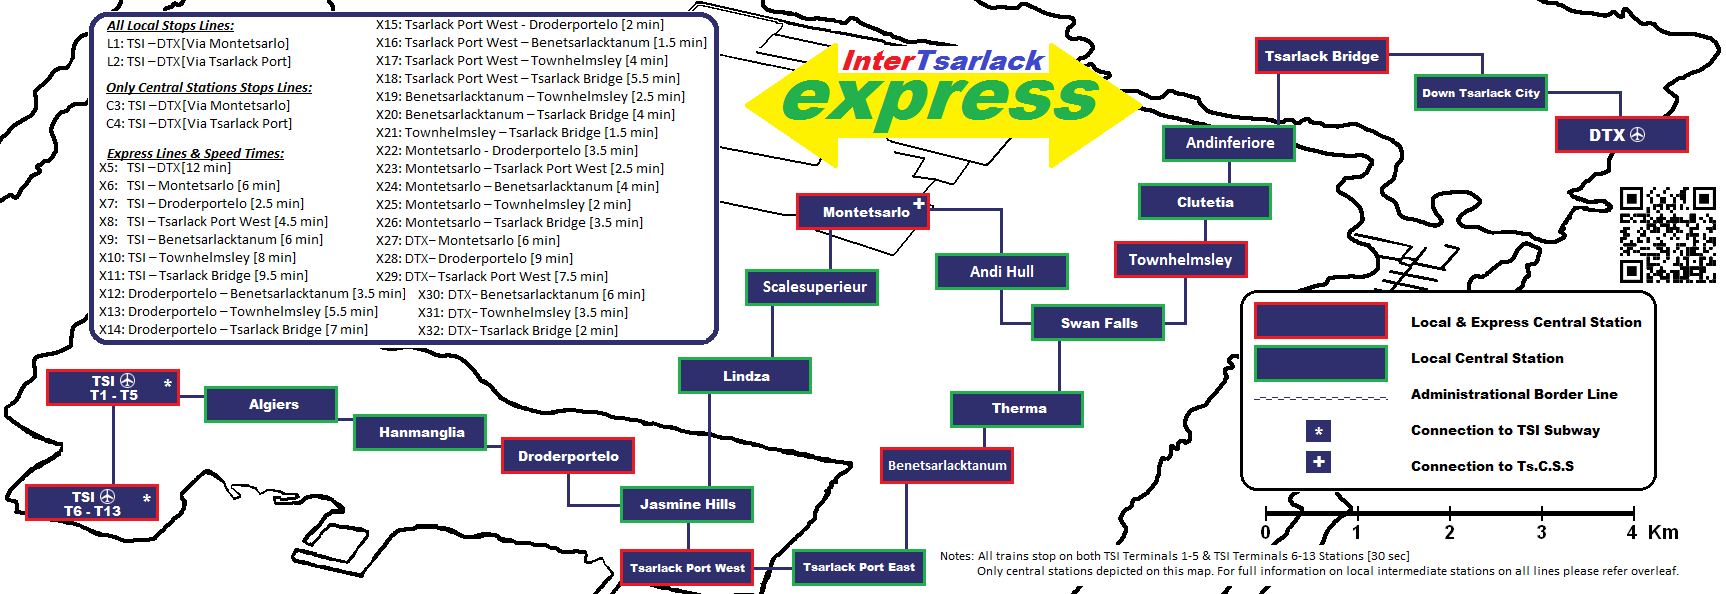 Click here to Download The Detailed InterTsarlack Express Map 